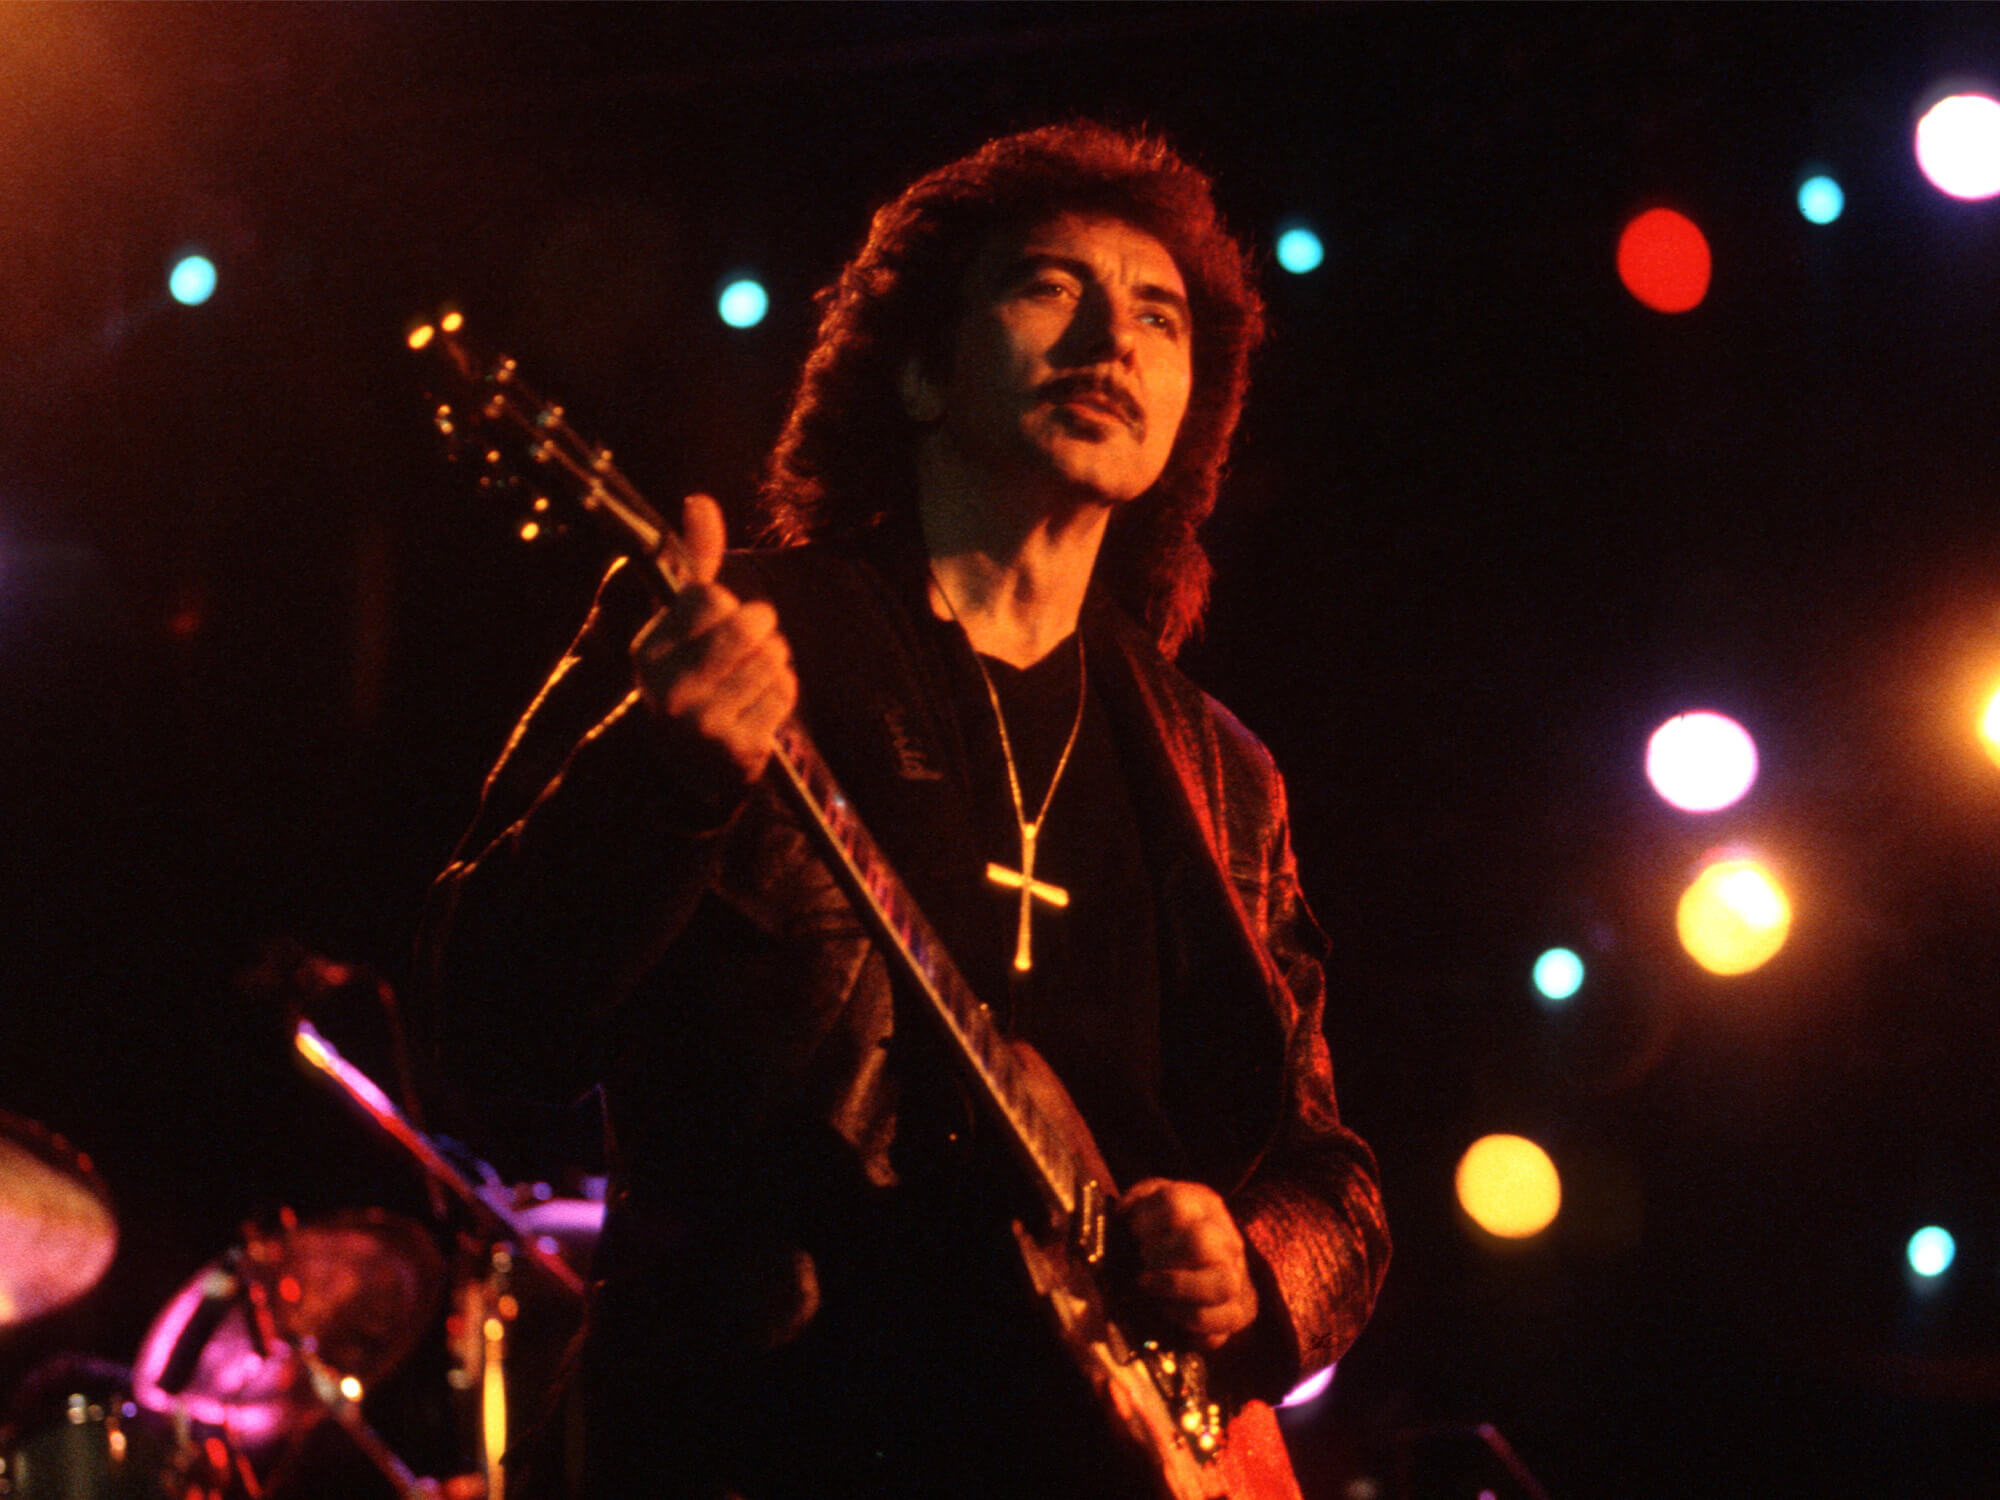 Tony Iommi pictured on stage with his guitar in the 90s